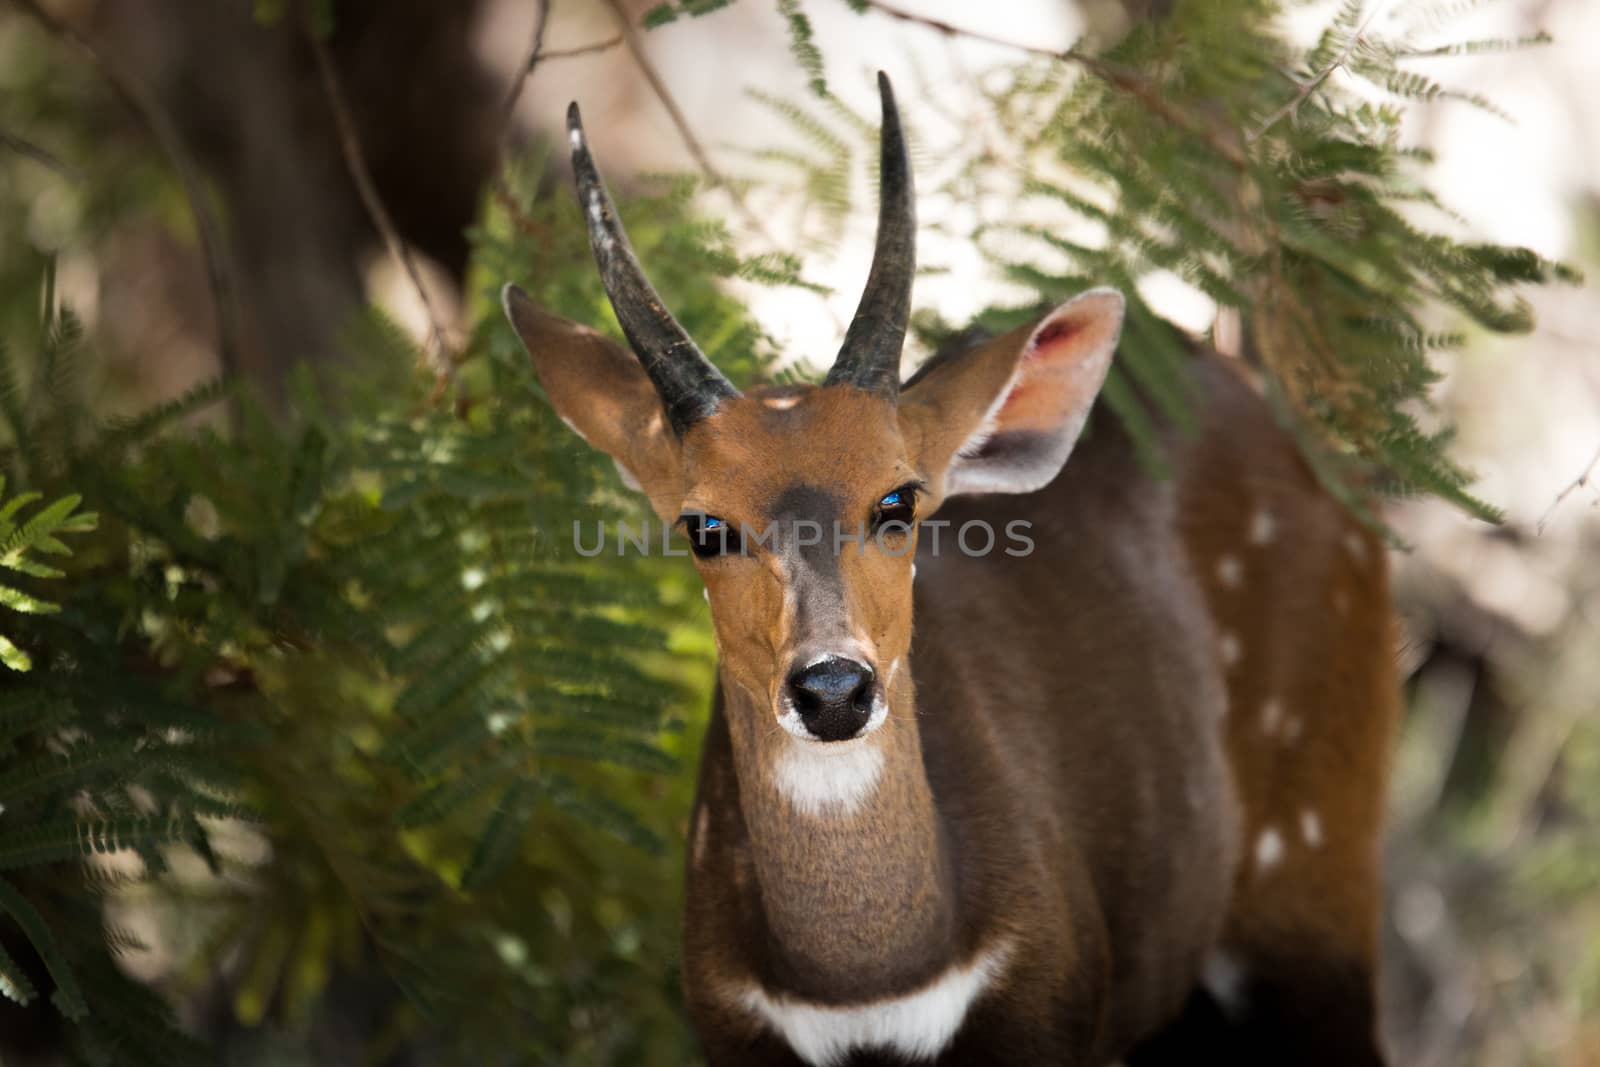 Starring Bushbuck in the Kruger National Park, South Africa.